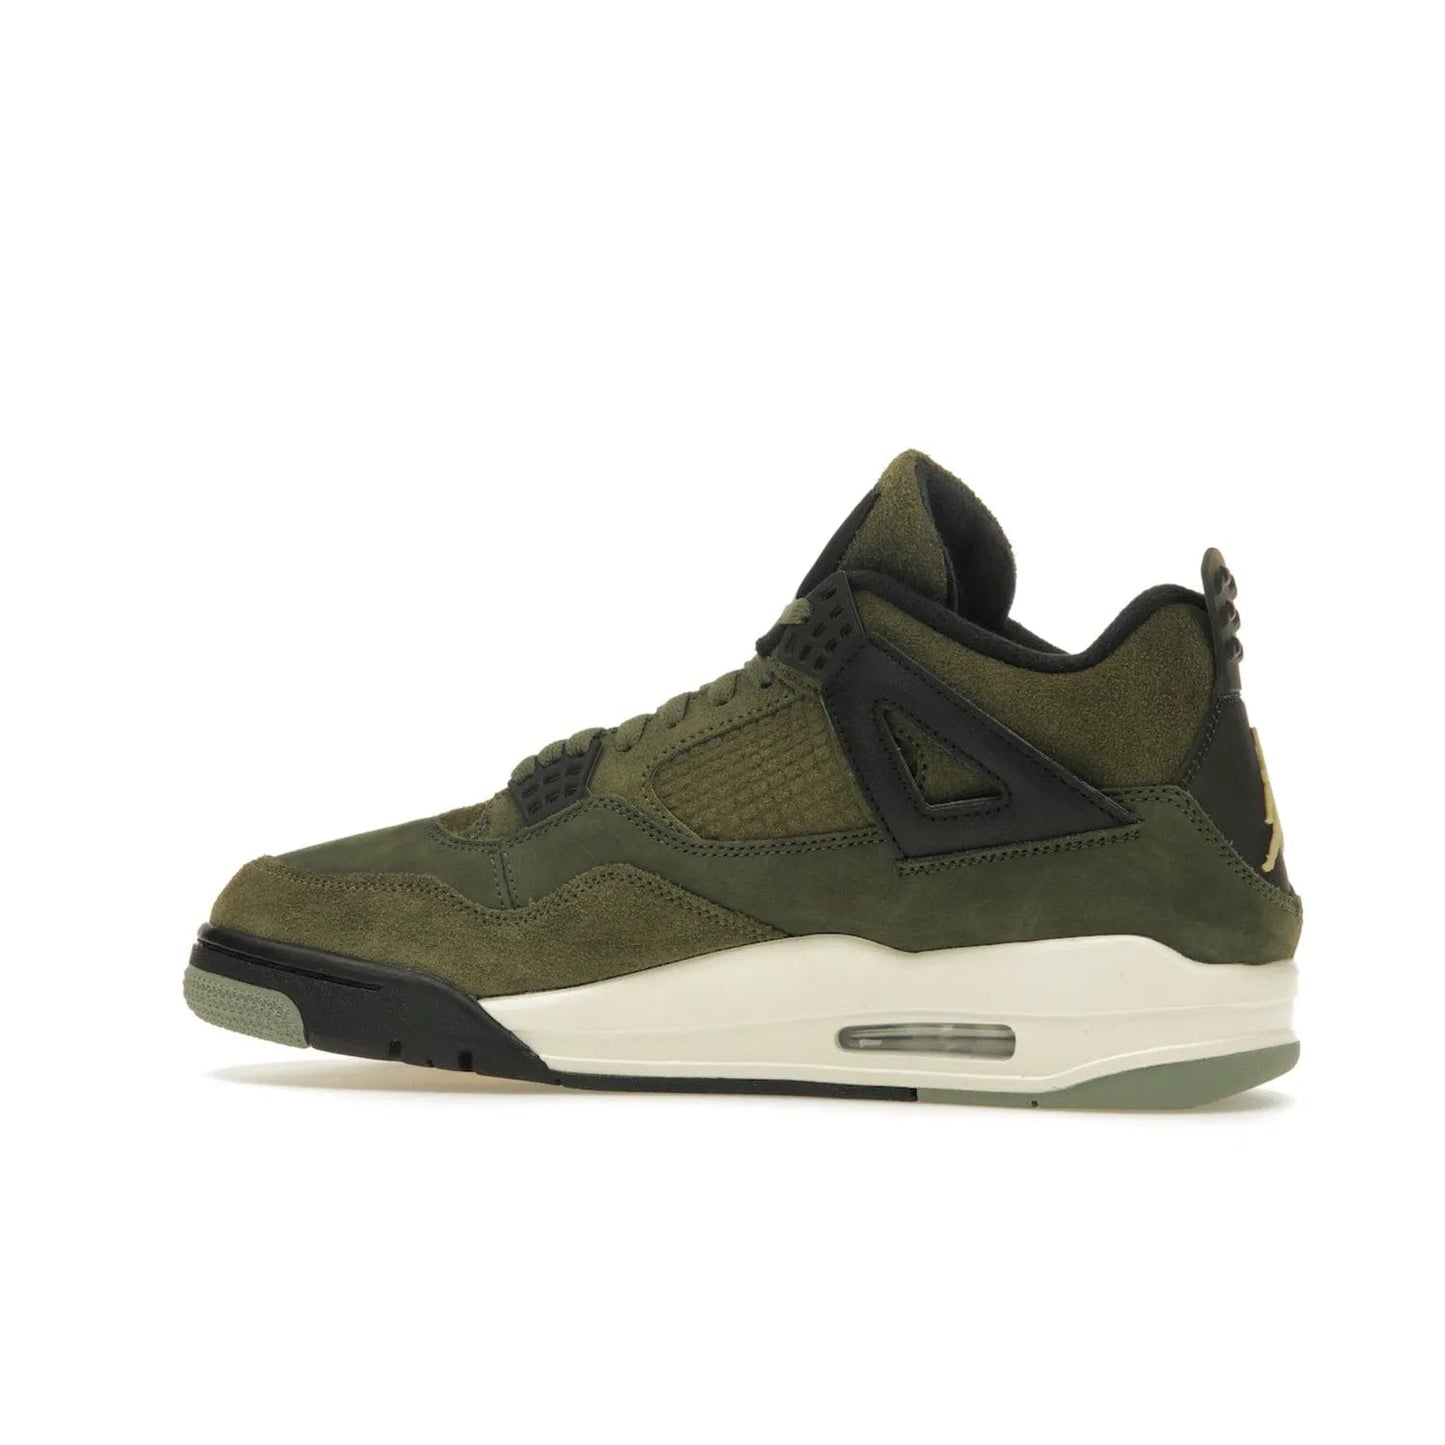 Jordan 4 Retro SE Craft Medium Olive - Image 21 - Only at www.BallersClubKickz.com - Grab the Jordan 4 Retro SE Crafts for a unique style. Combines Medium Olive, Pale Vanilla, Khaki, Black and Sail, with same classic shape, cushioning, and rubber outsole. Available on November 18th!